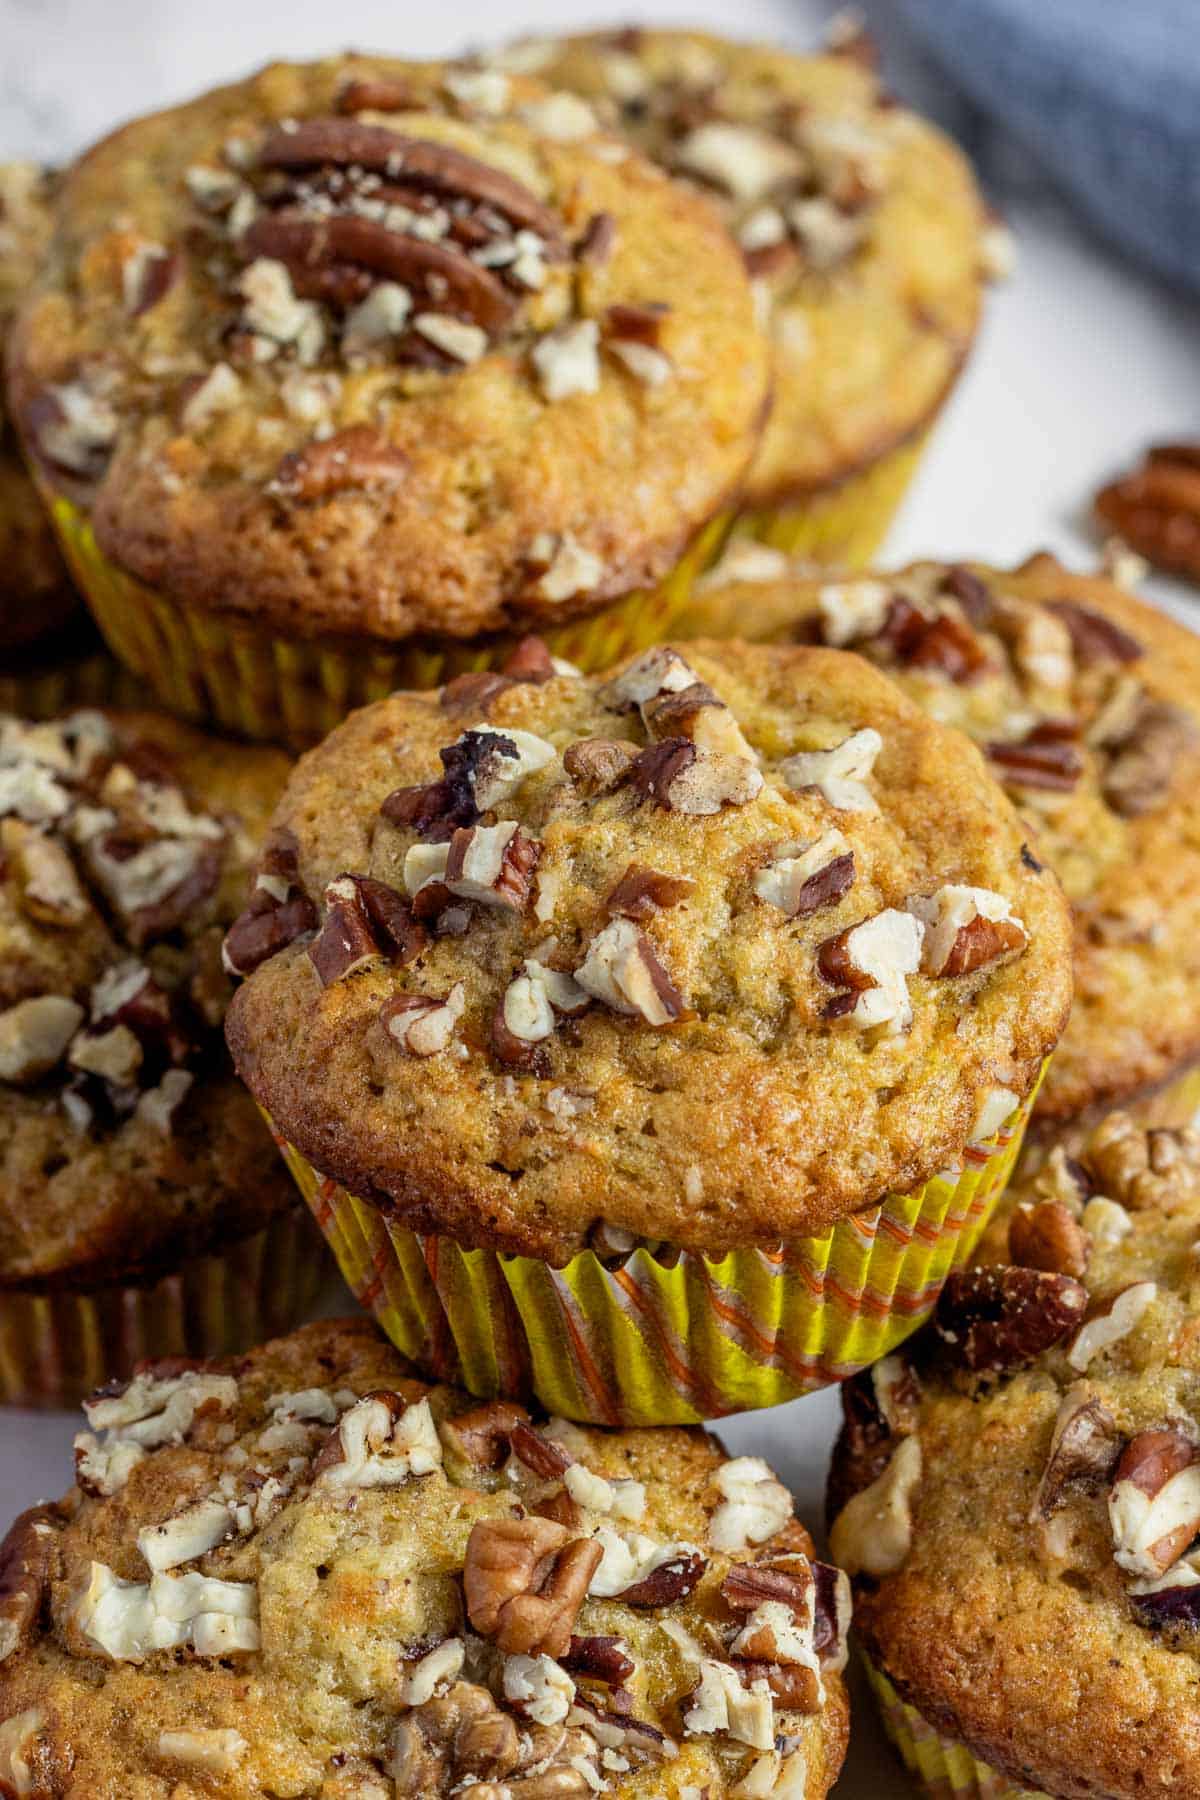 Carrot banana muffins with nuts.